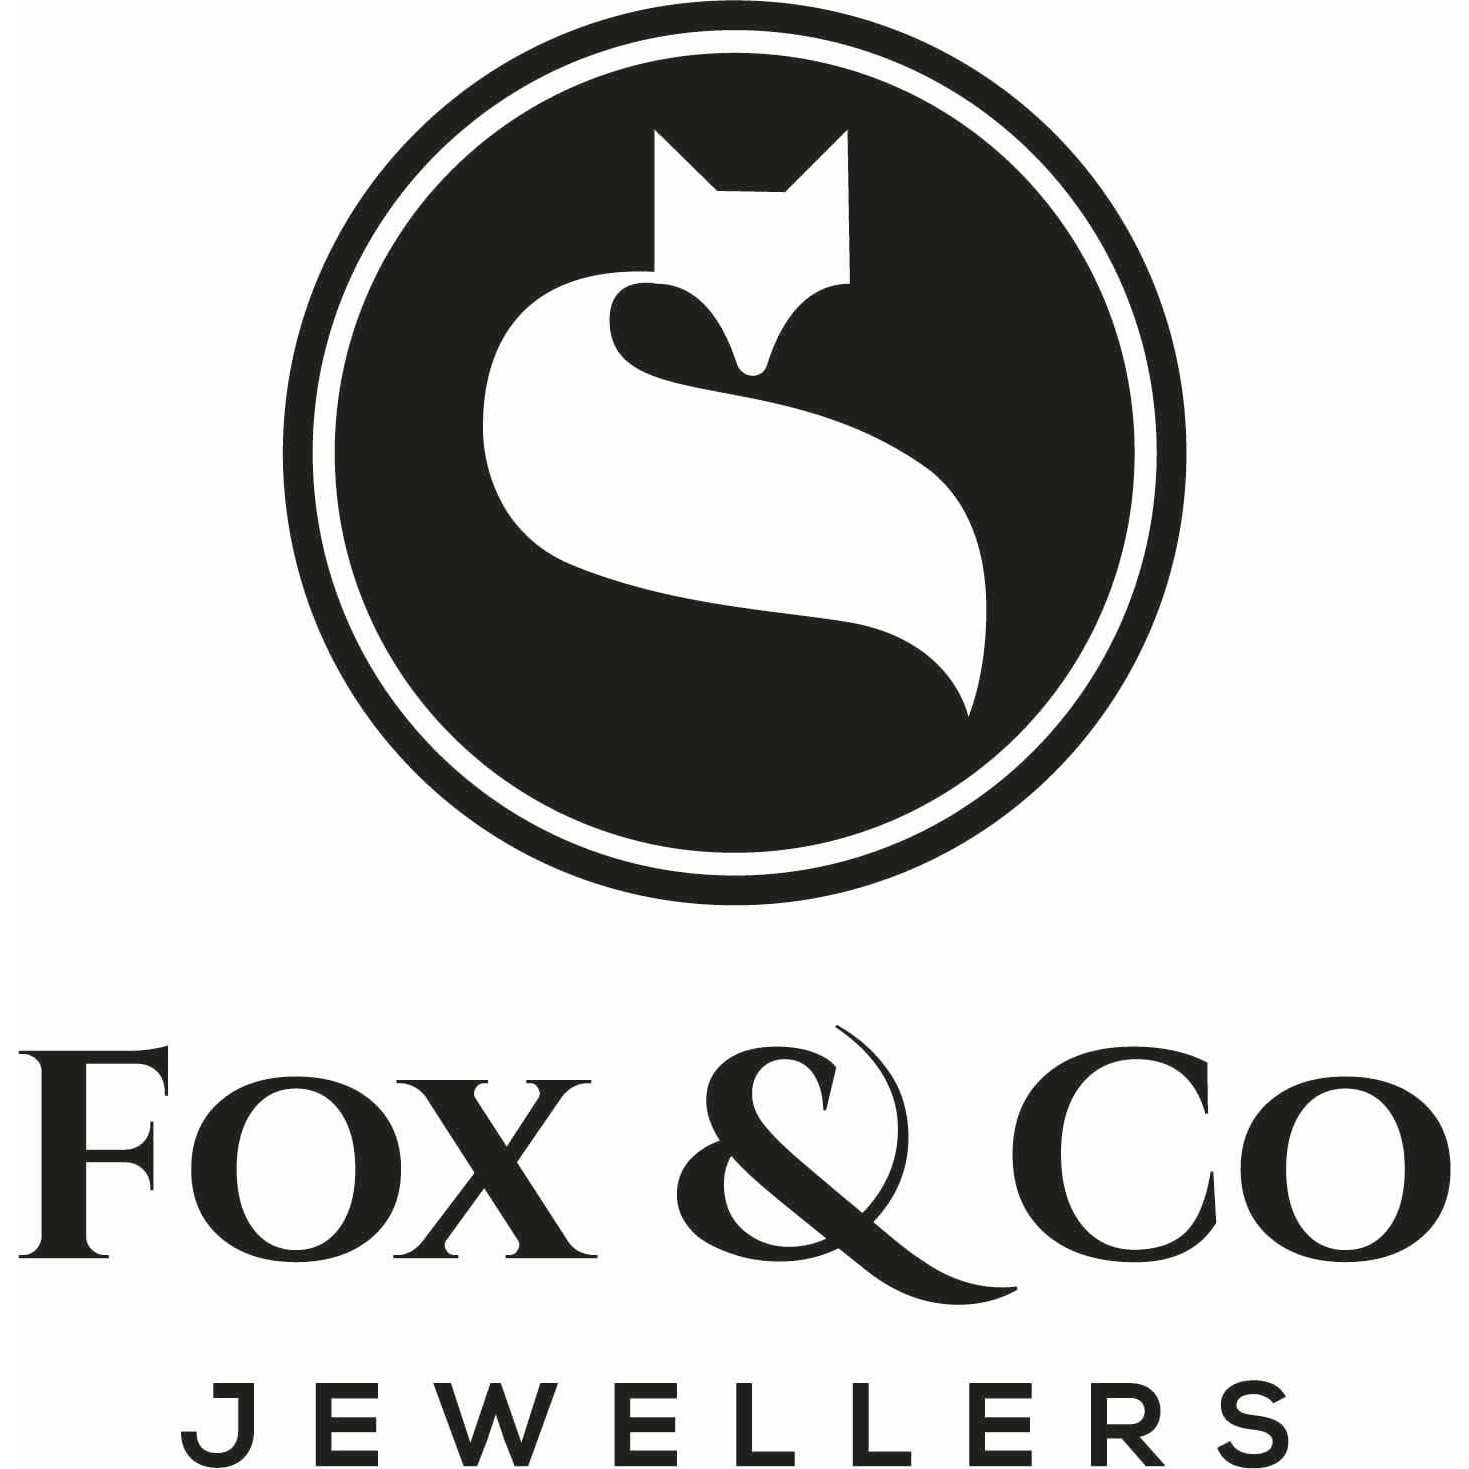 Fox & Co Jewellers Of Stowmarket - Stowmarket, Essex IP14 1AD - 01449 616333 | ShowMeLocal.com